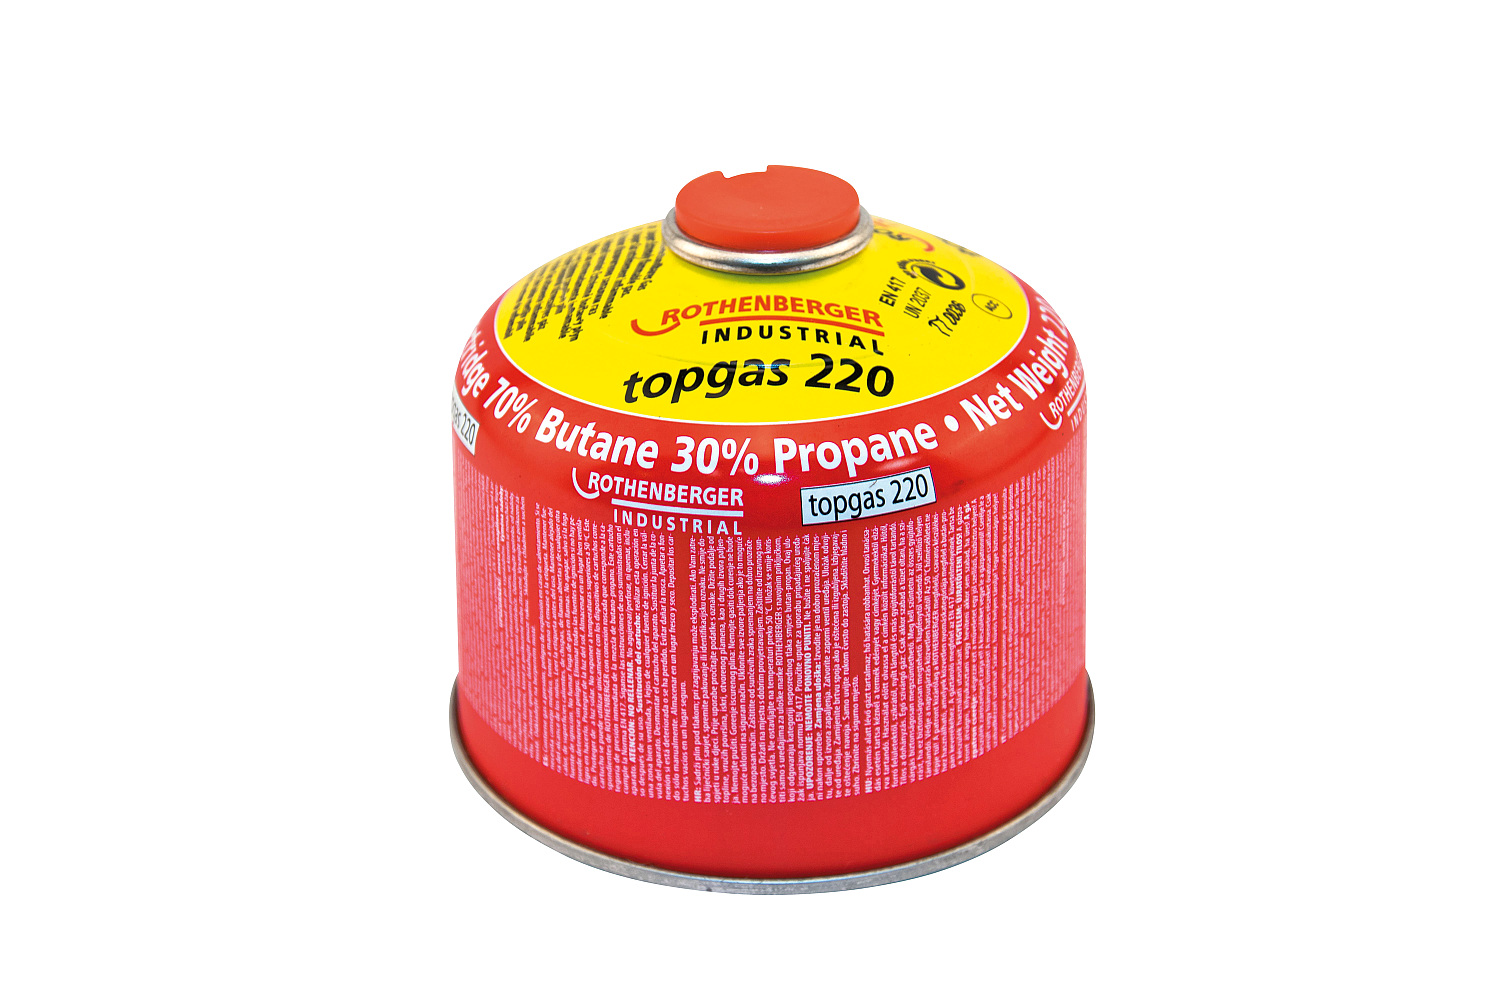 ROTHENBERGER Topgas 220, 220 g / 370 ml